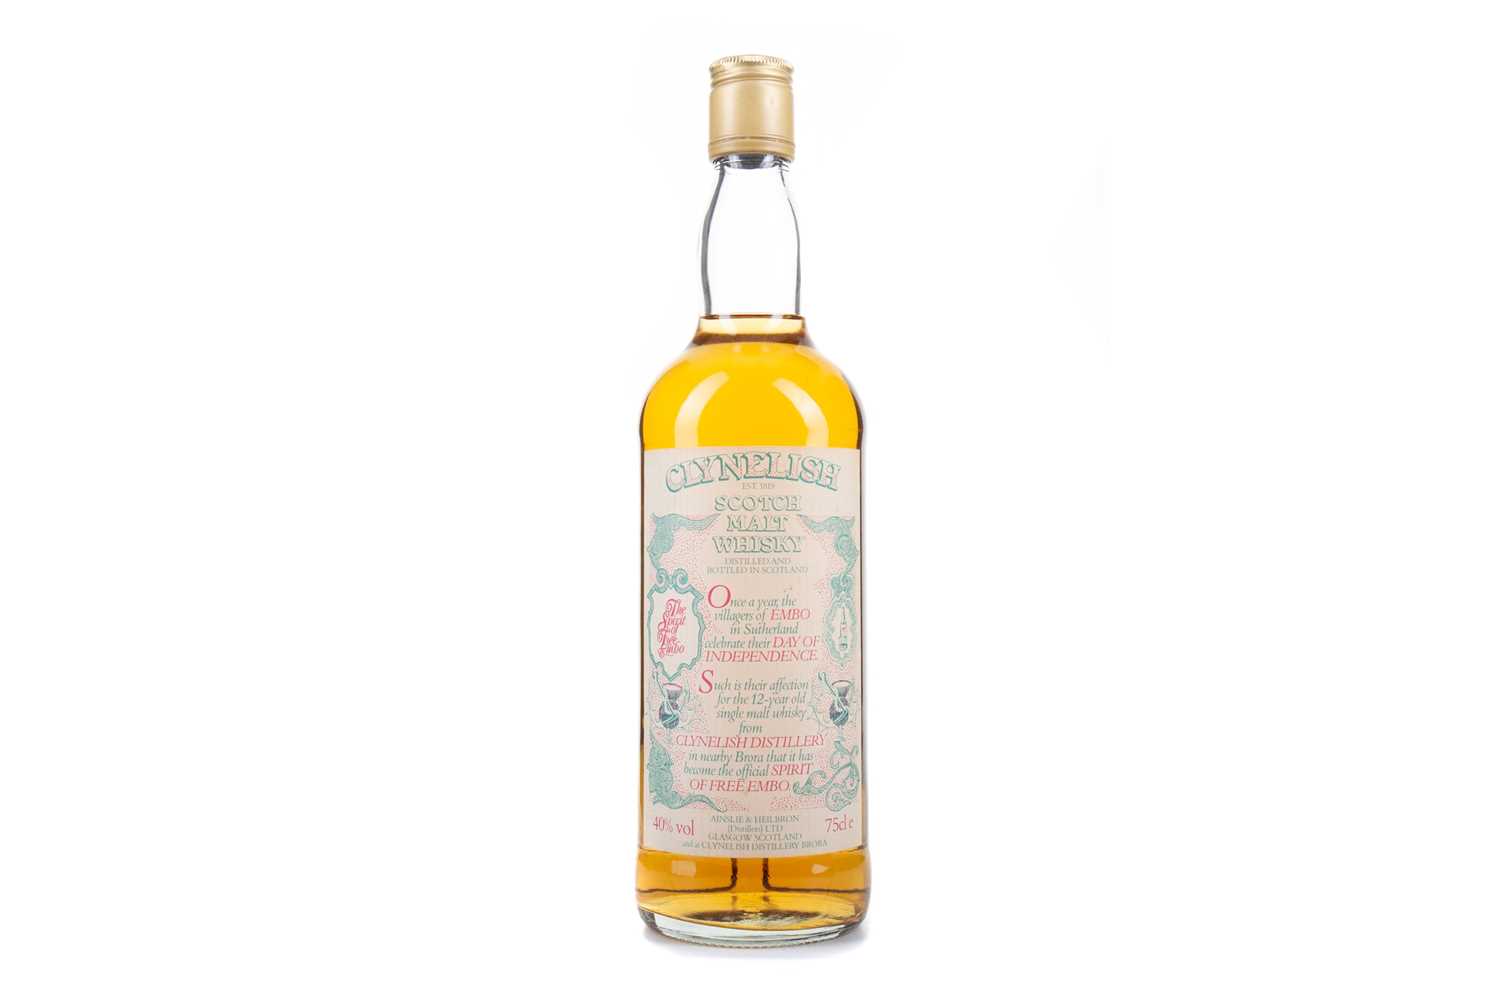 Lot 83 - CLYNELISH 12 YEAR OLD SPIRIT OF FREE EMBO 75CL